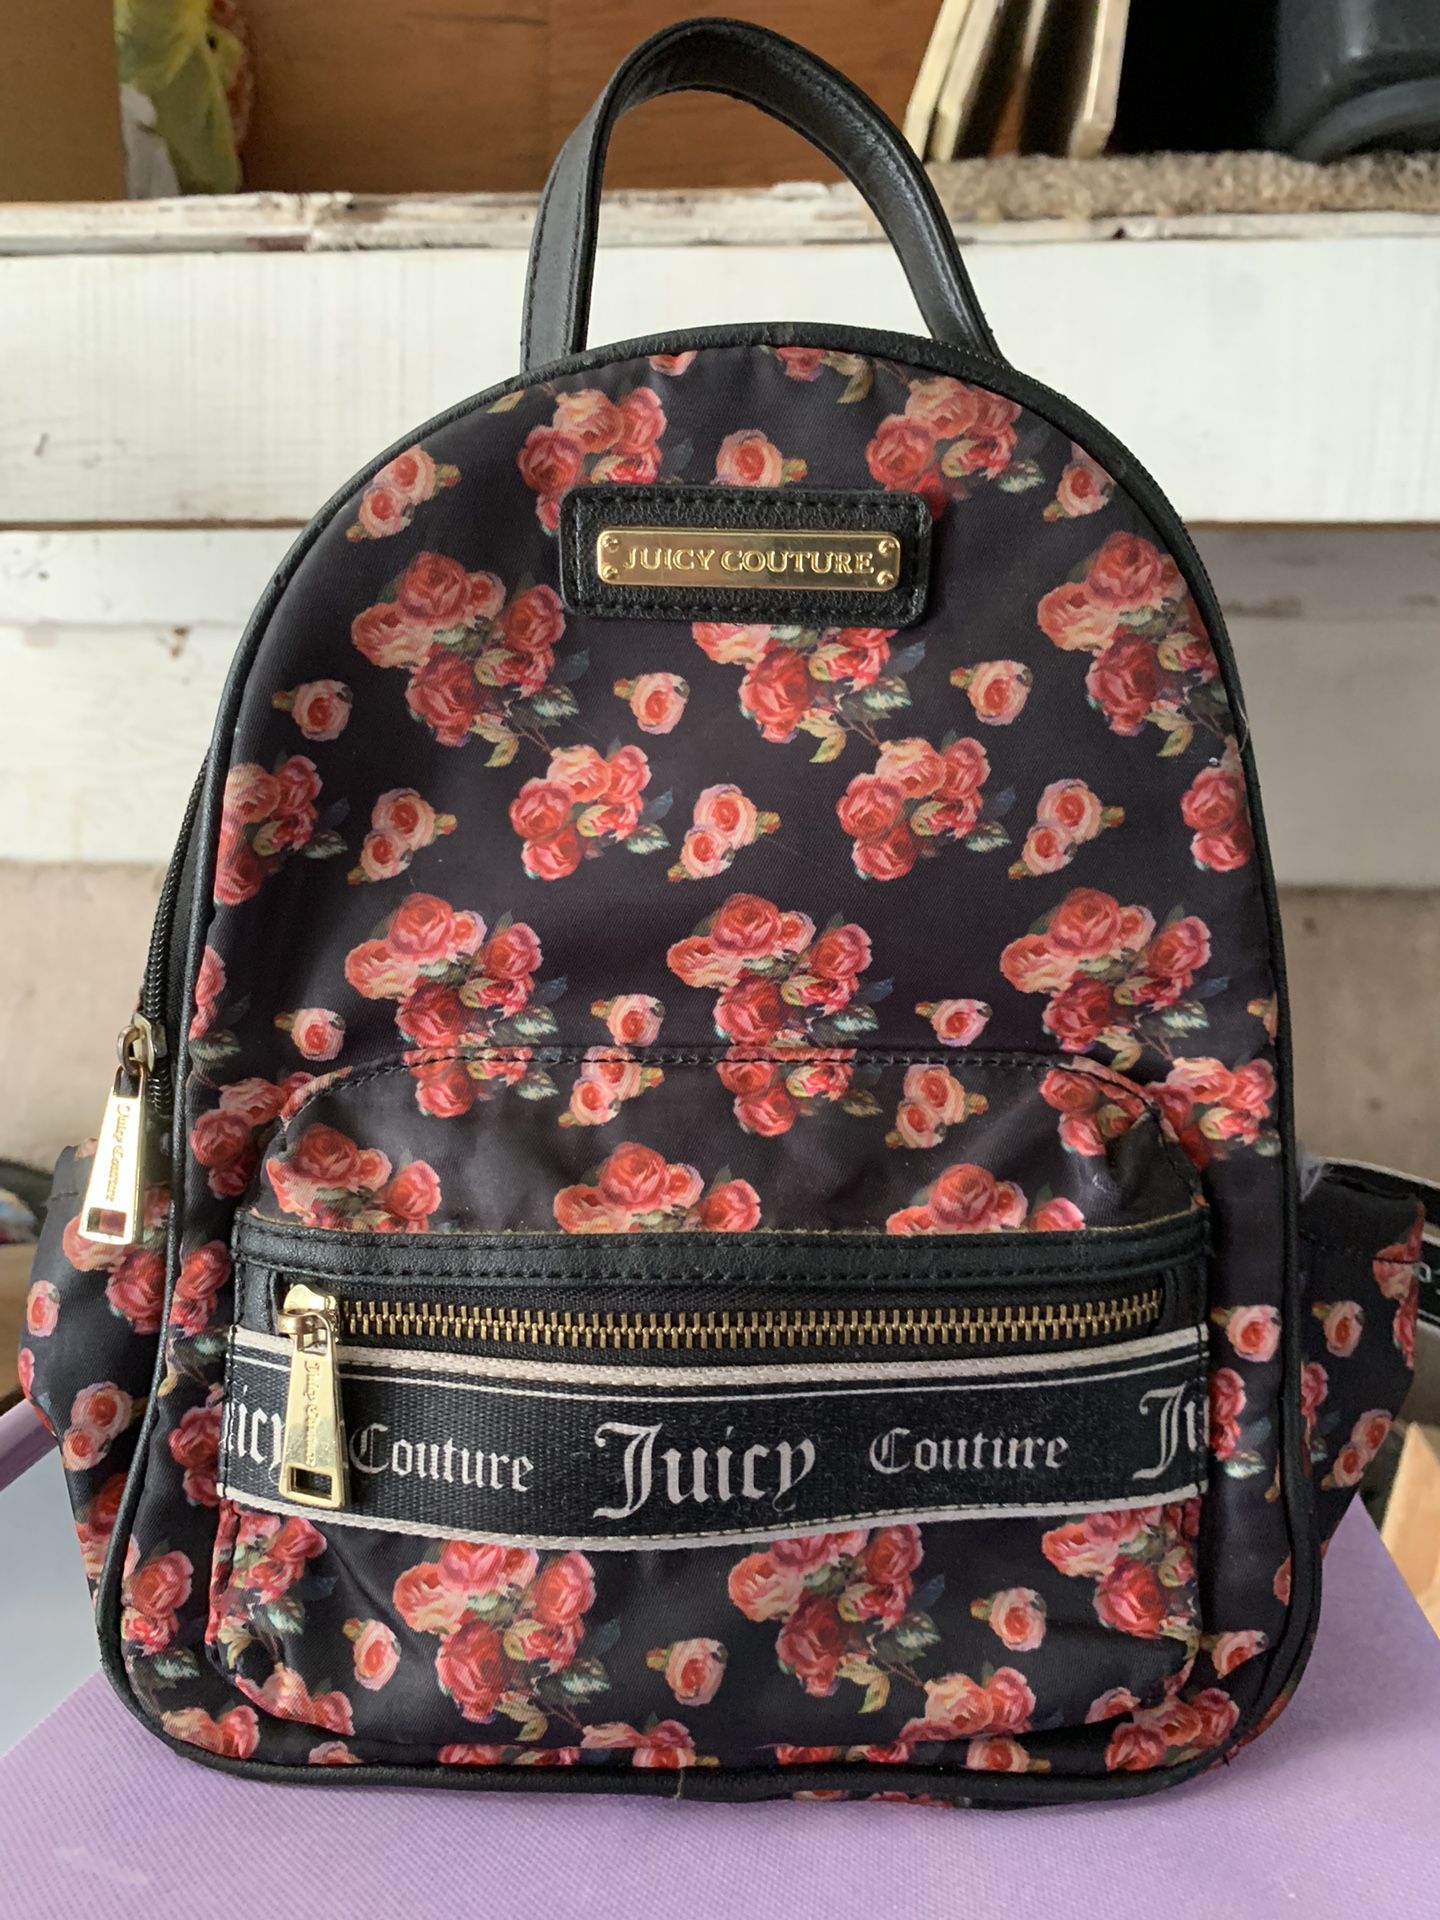 Juicy Couture Backpack for Sale in Tracy, CA - OfferUp